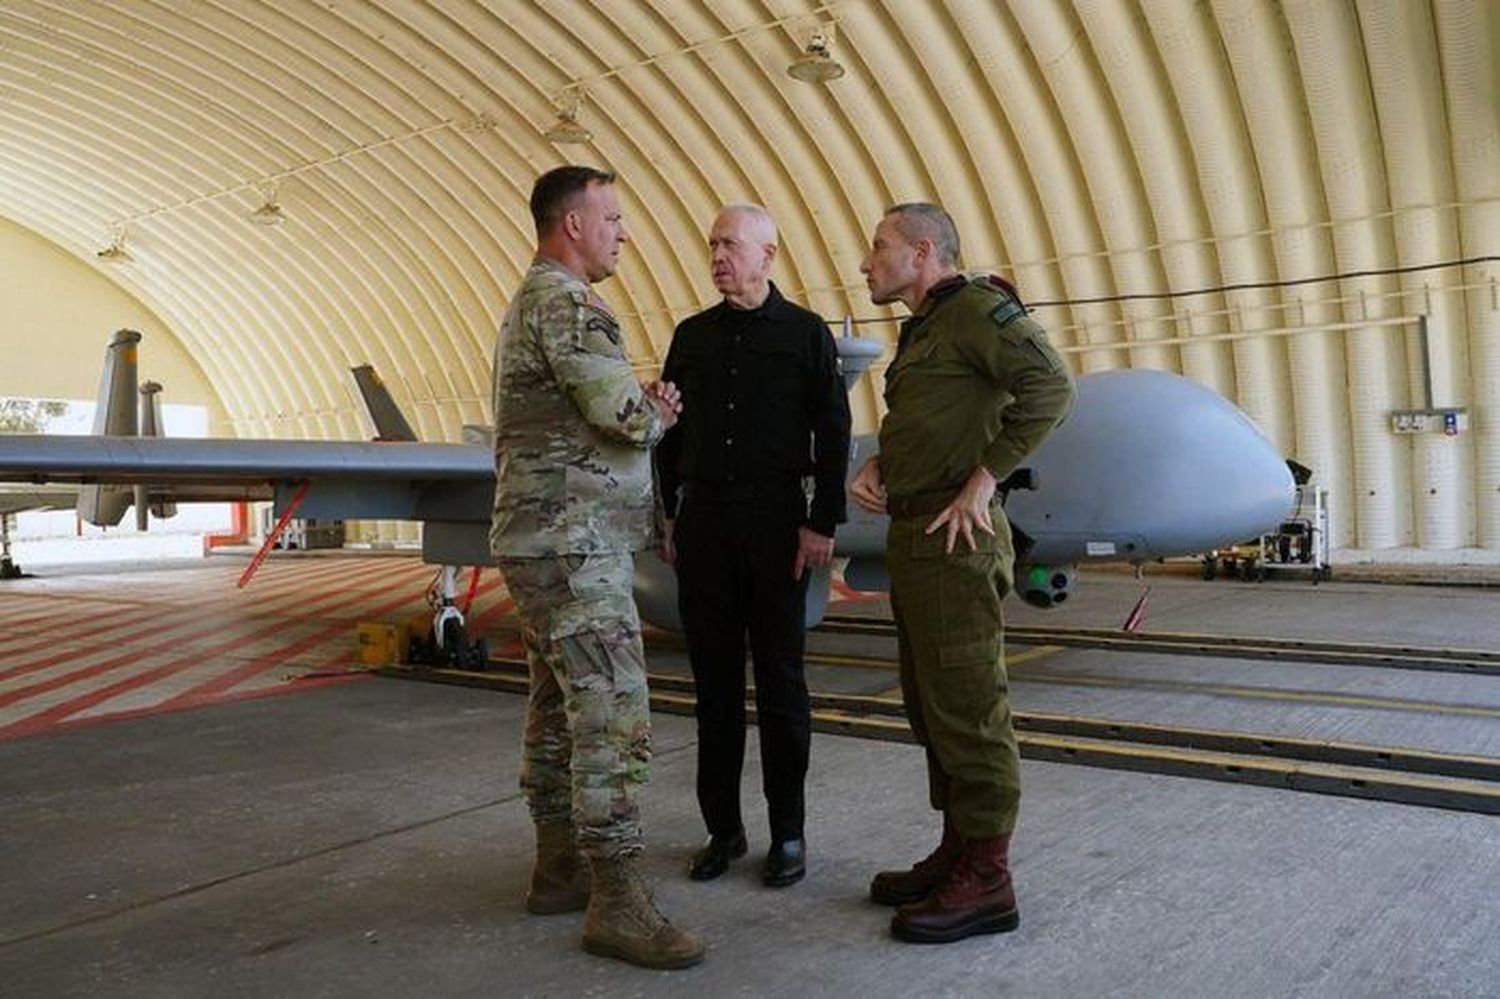 Israeli Defense Minister Yoav Gallant, in black, meeting with Army Gen. Erik Kurilla, head of U.S. Central Command, at an air base in Israel.